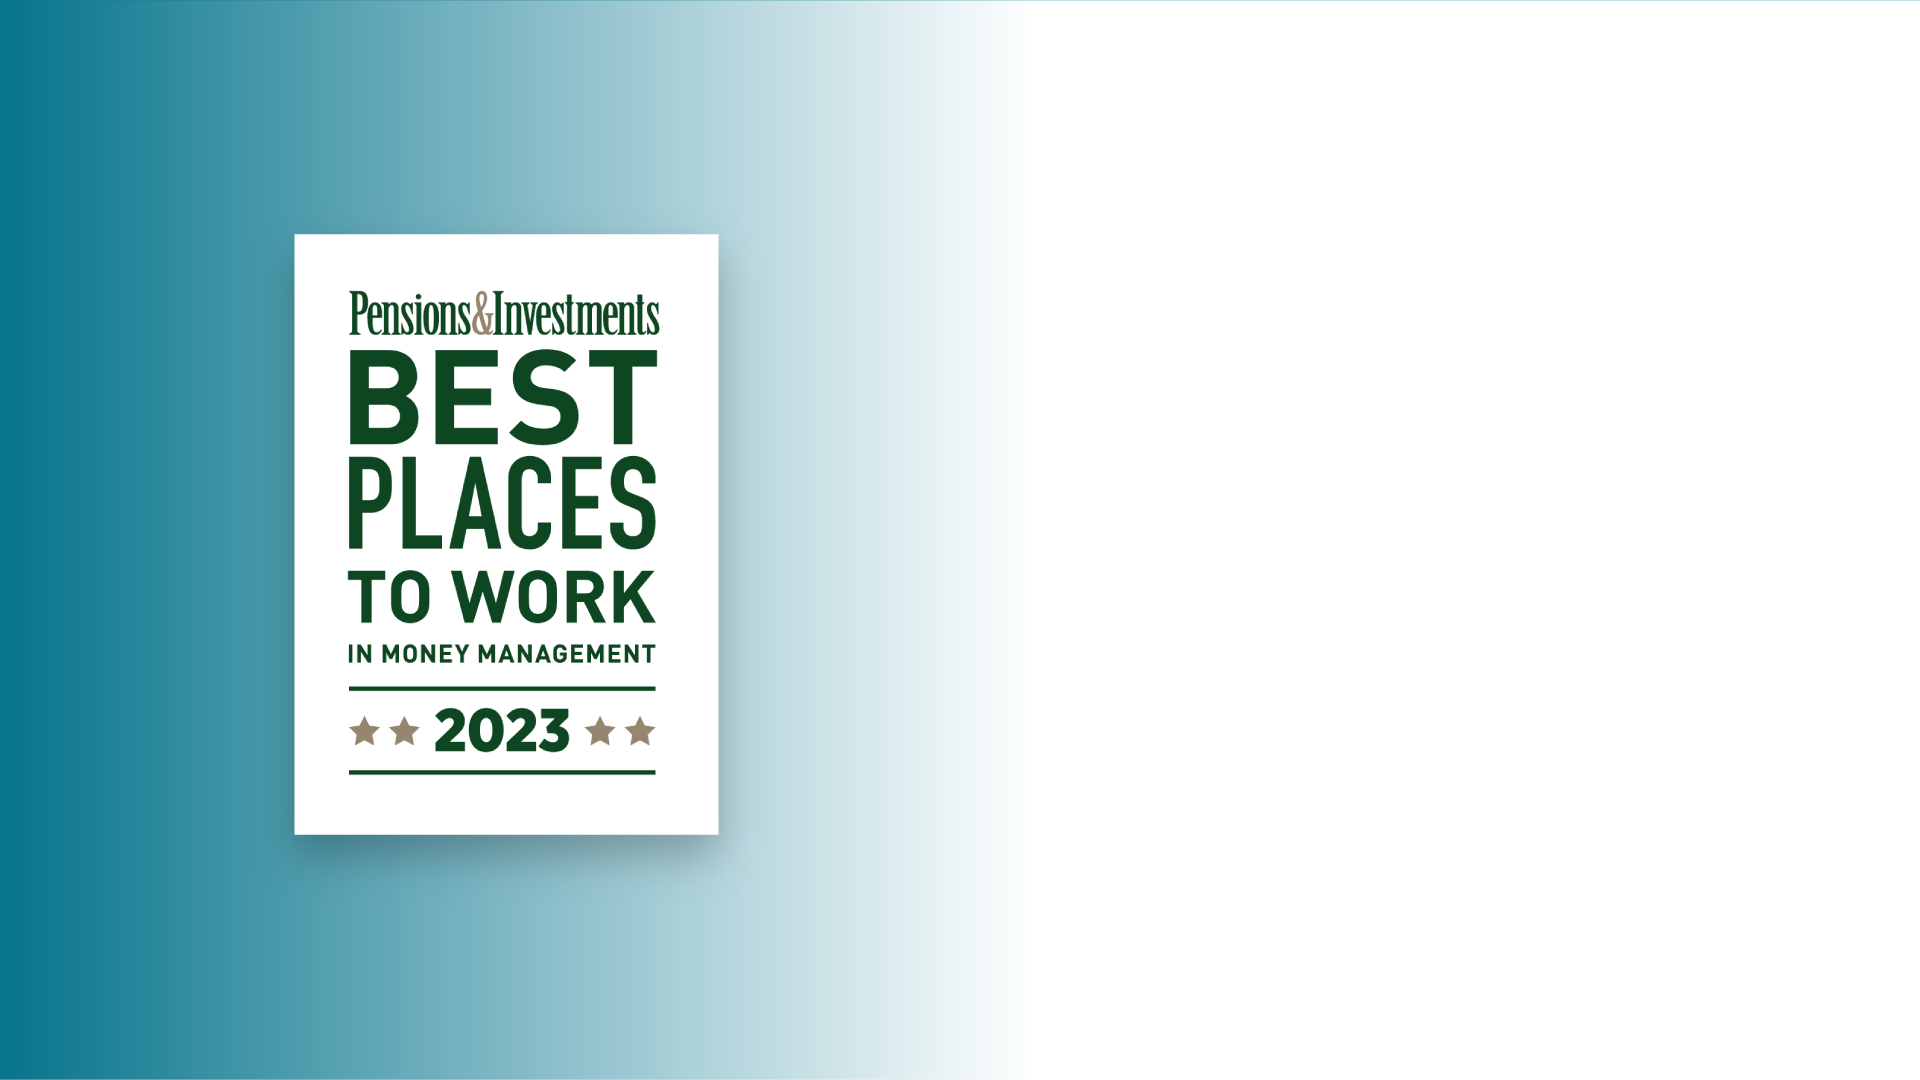 2023 Best Places to Work in Money Management by Pensions & Investments